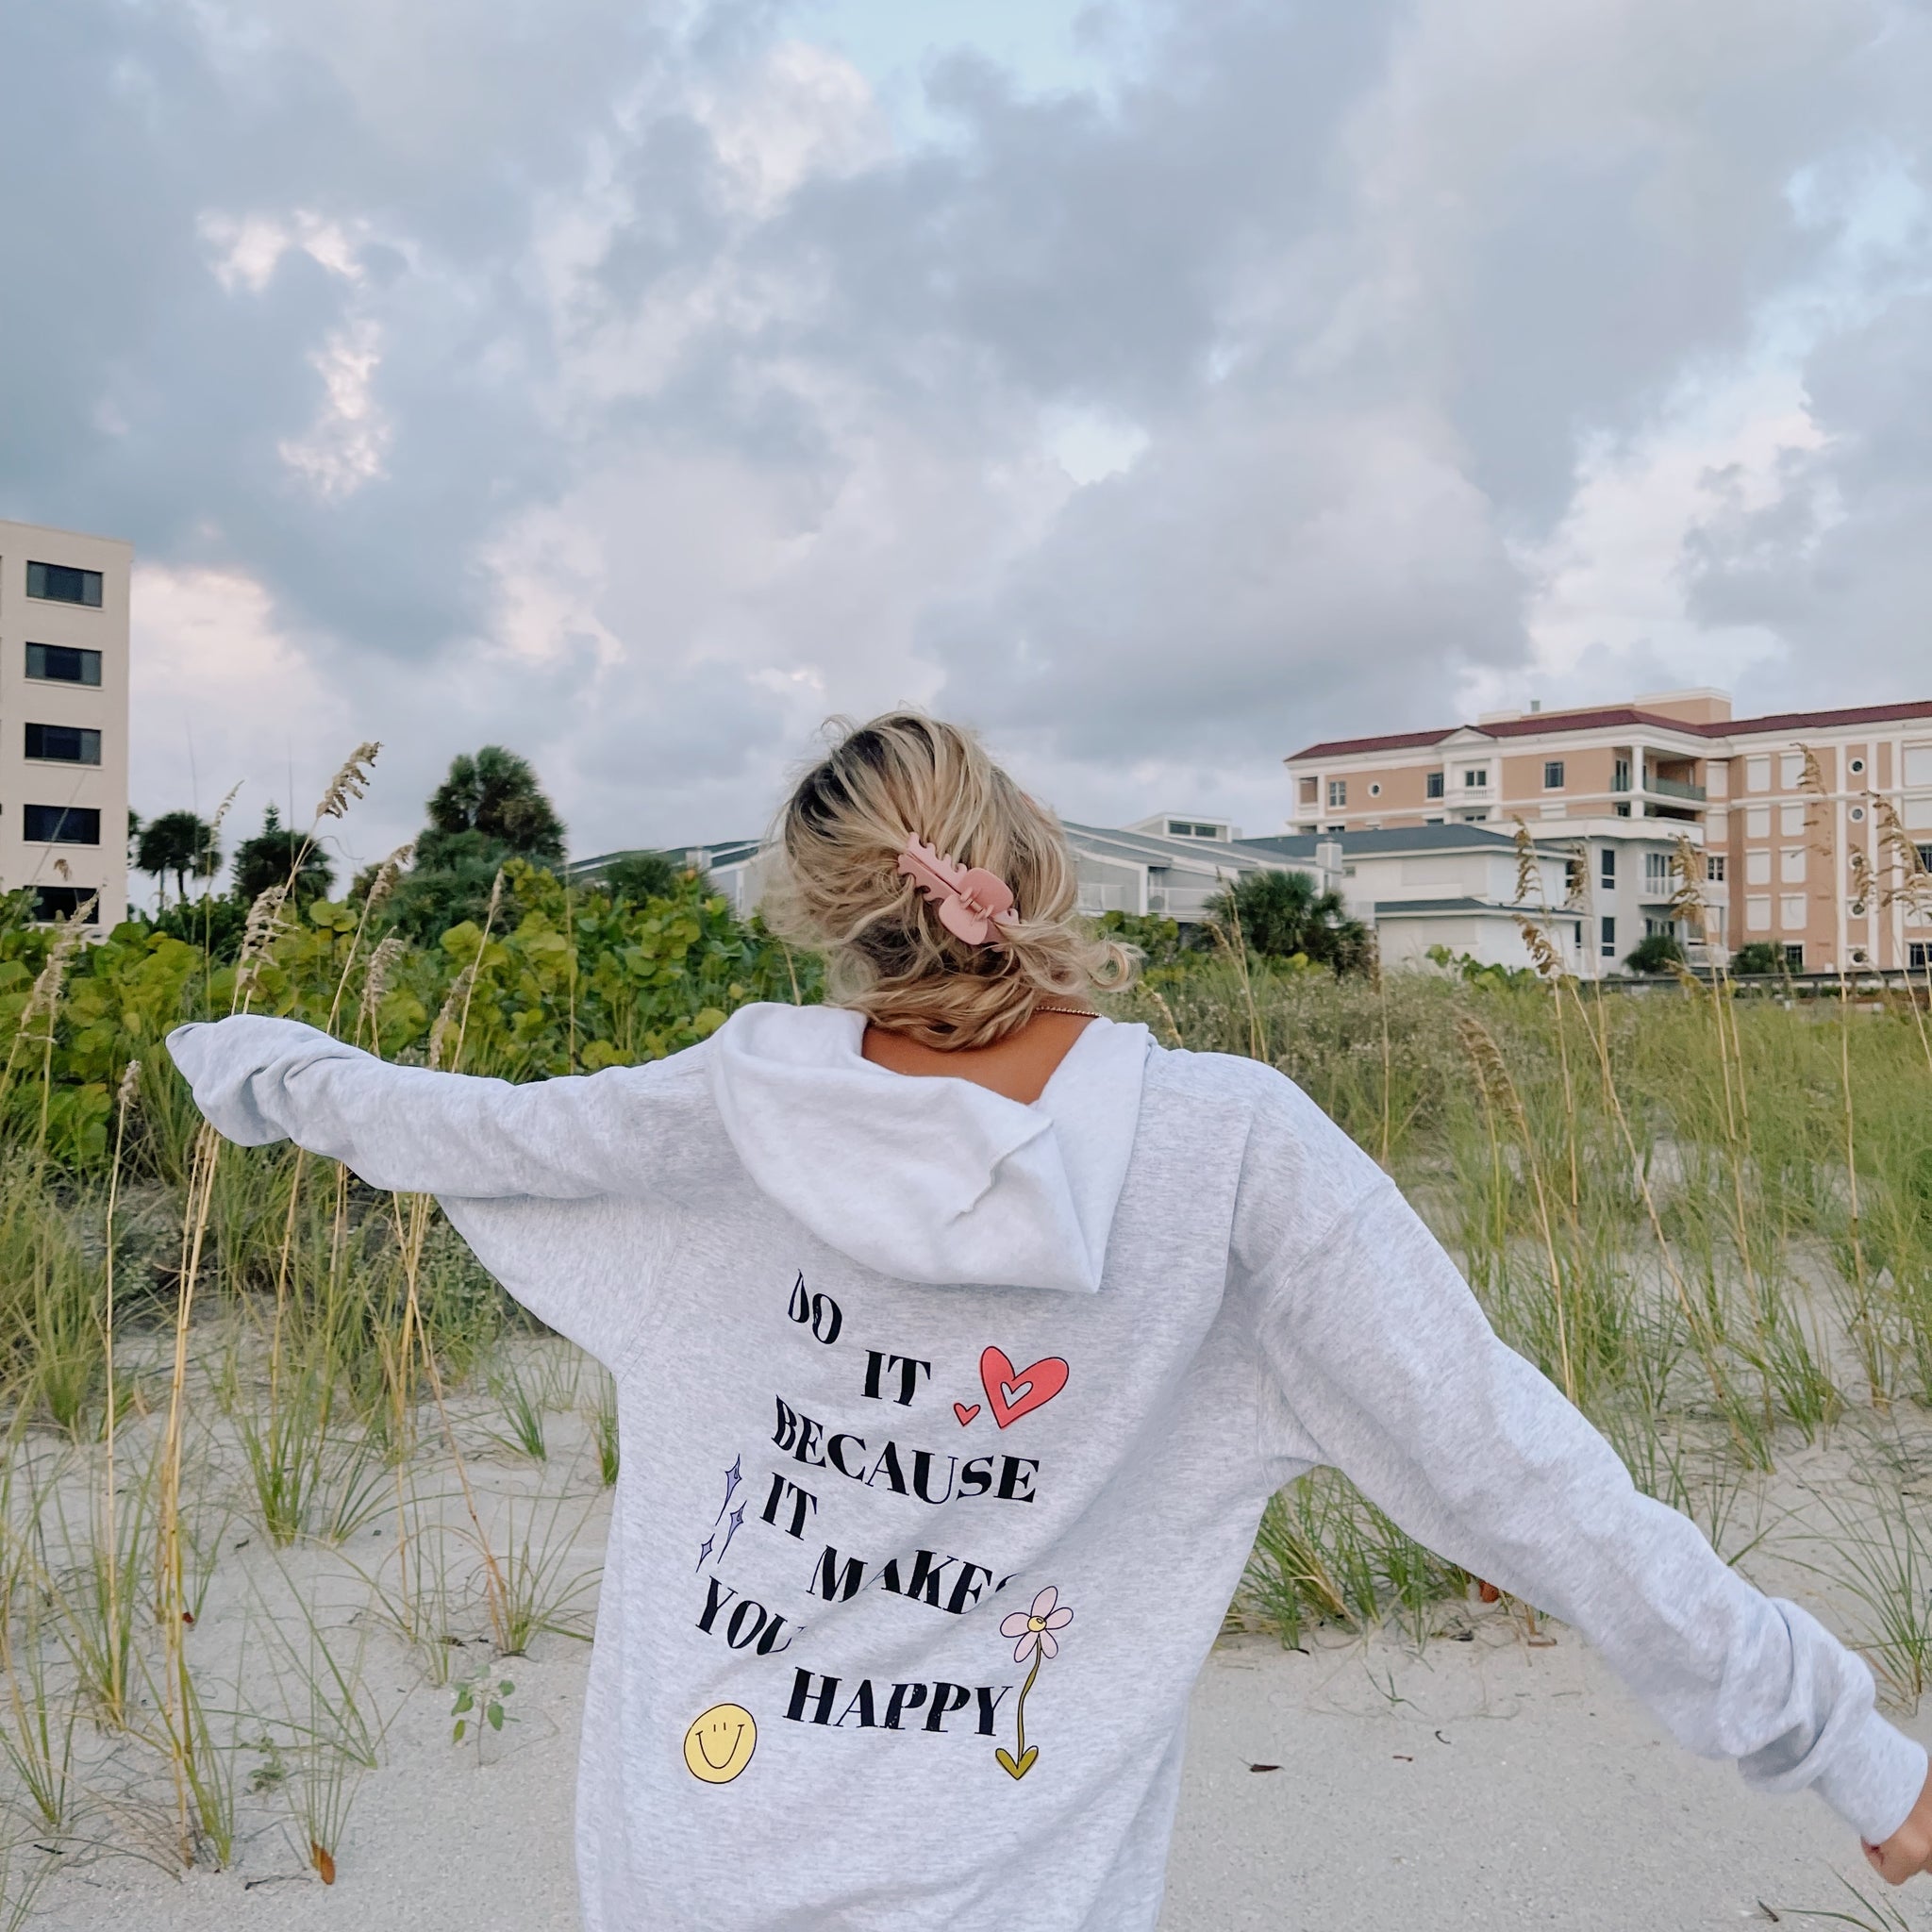 "DO IT BECAUSE IT MAKES YOU HAPPY" ZIP UP